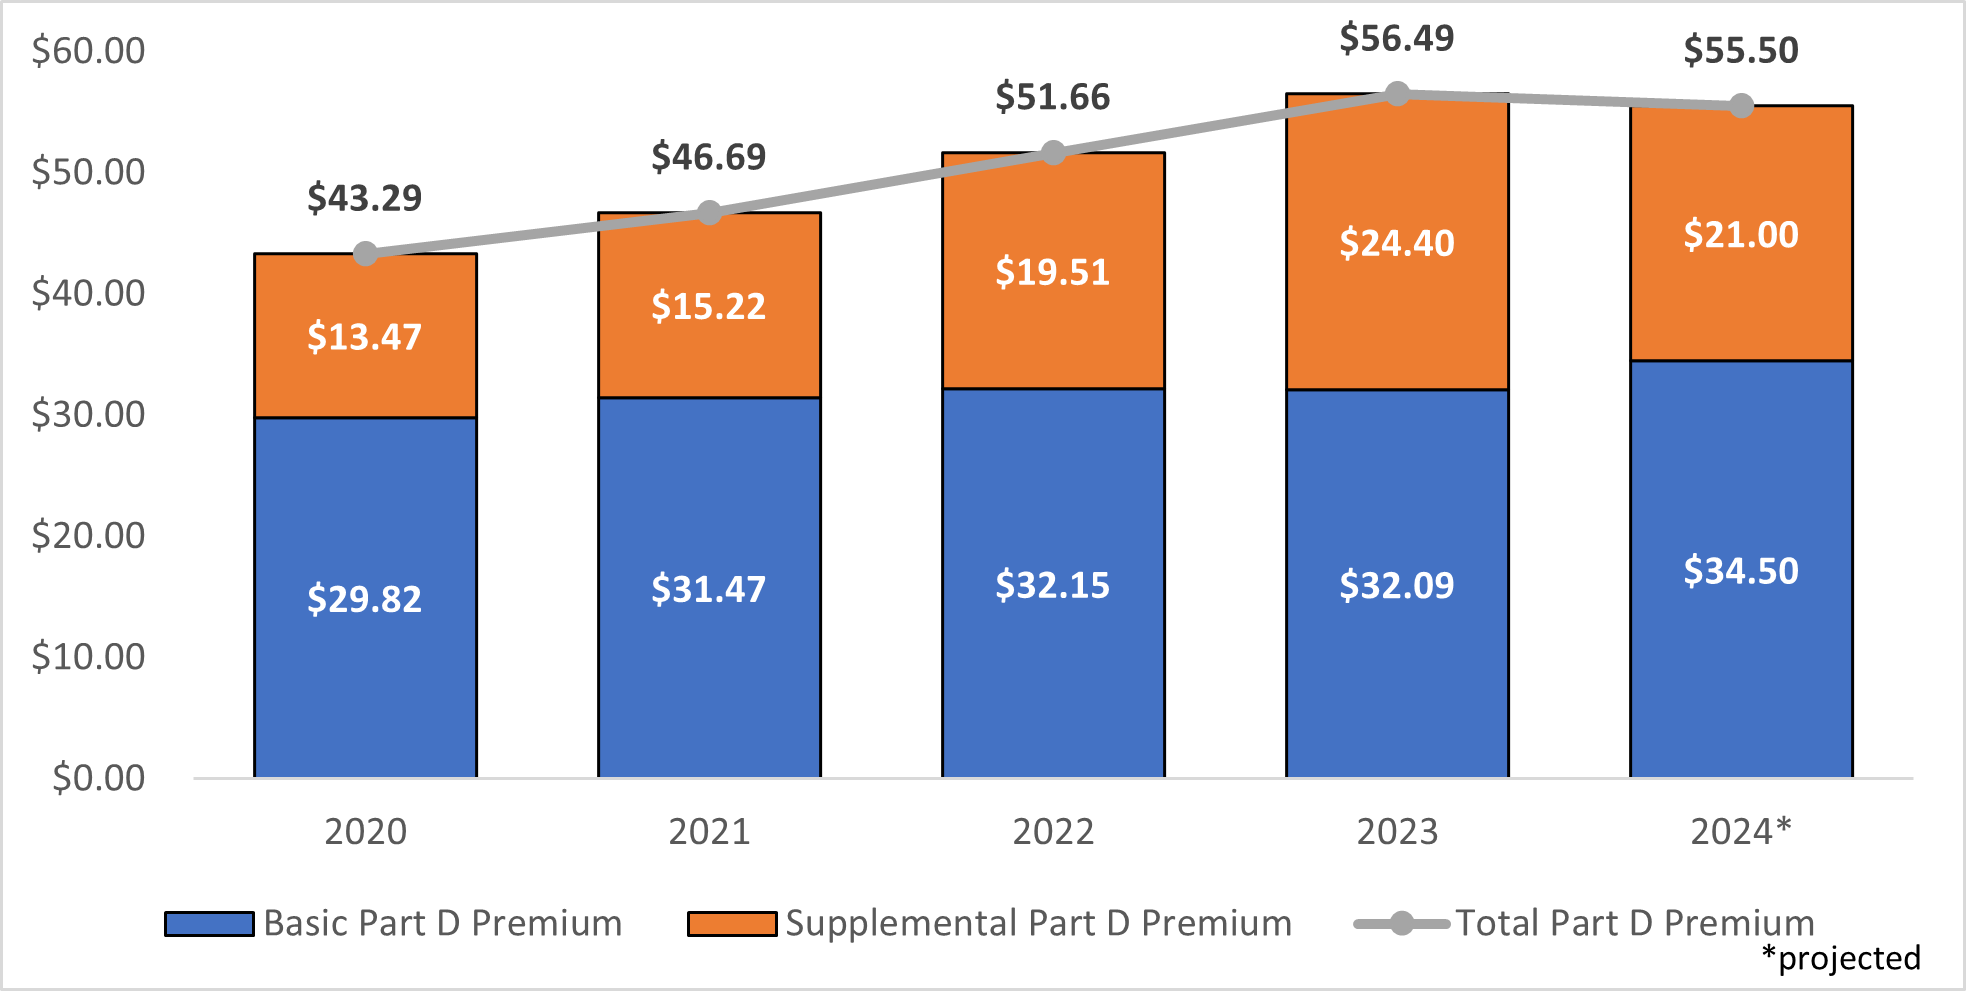 CMS Releases 2024 Projected Medicare Part D Premium and Bid Information